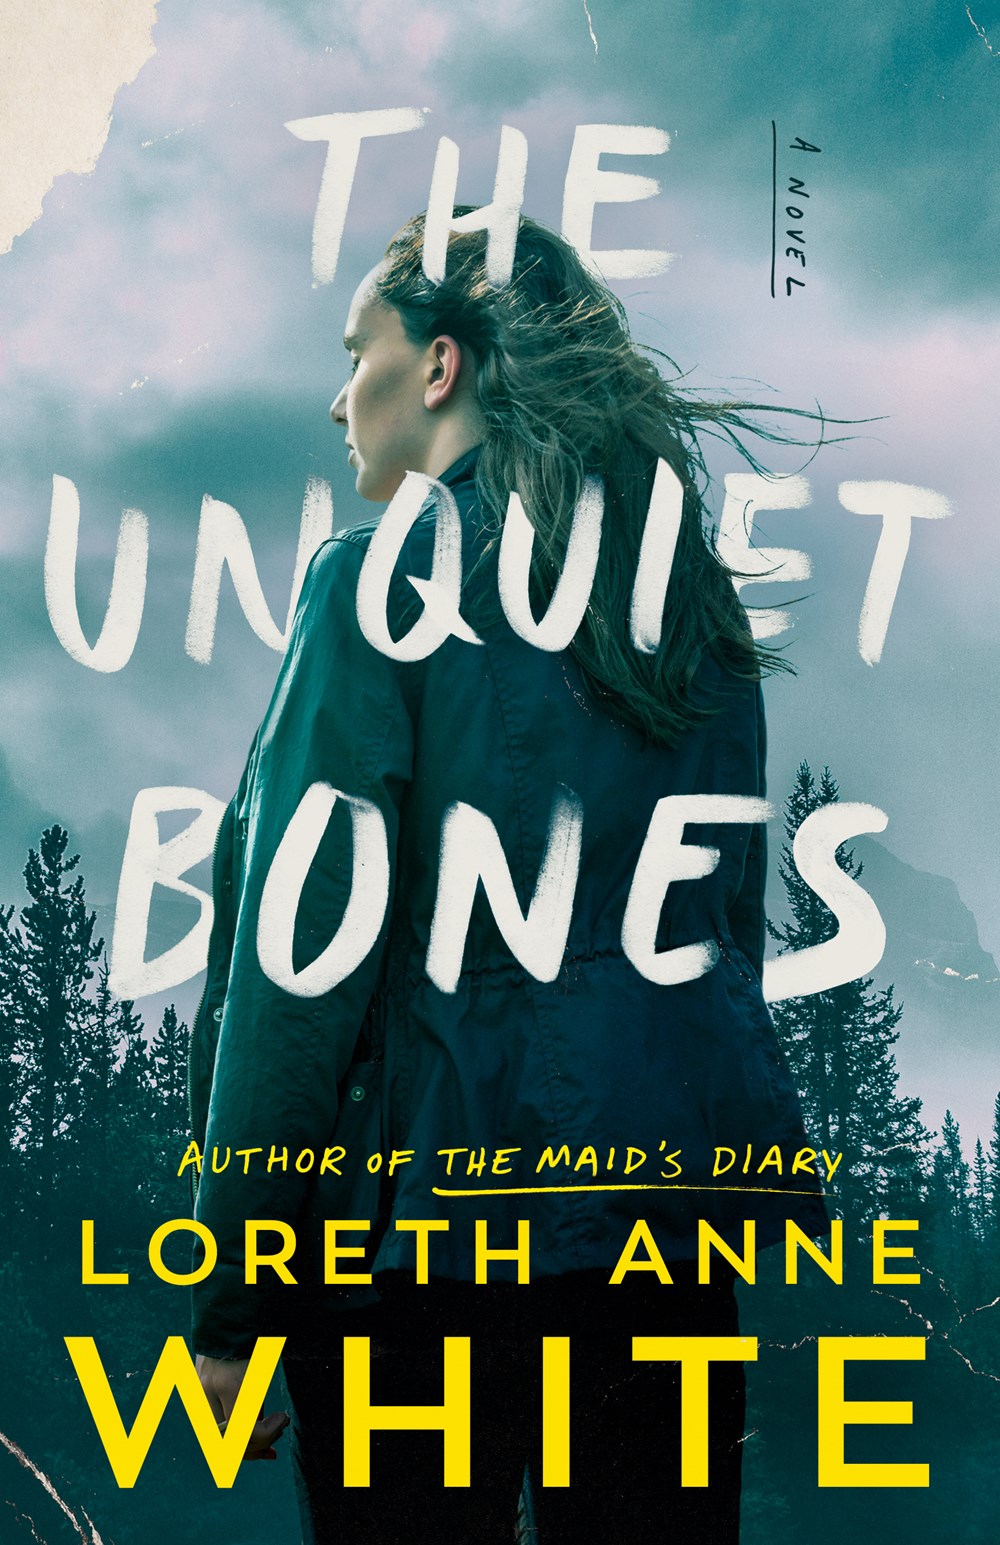 ‘The Unquiet Bones’ by Loreth Anne White | Mystery Pick of the Month